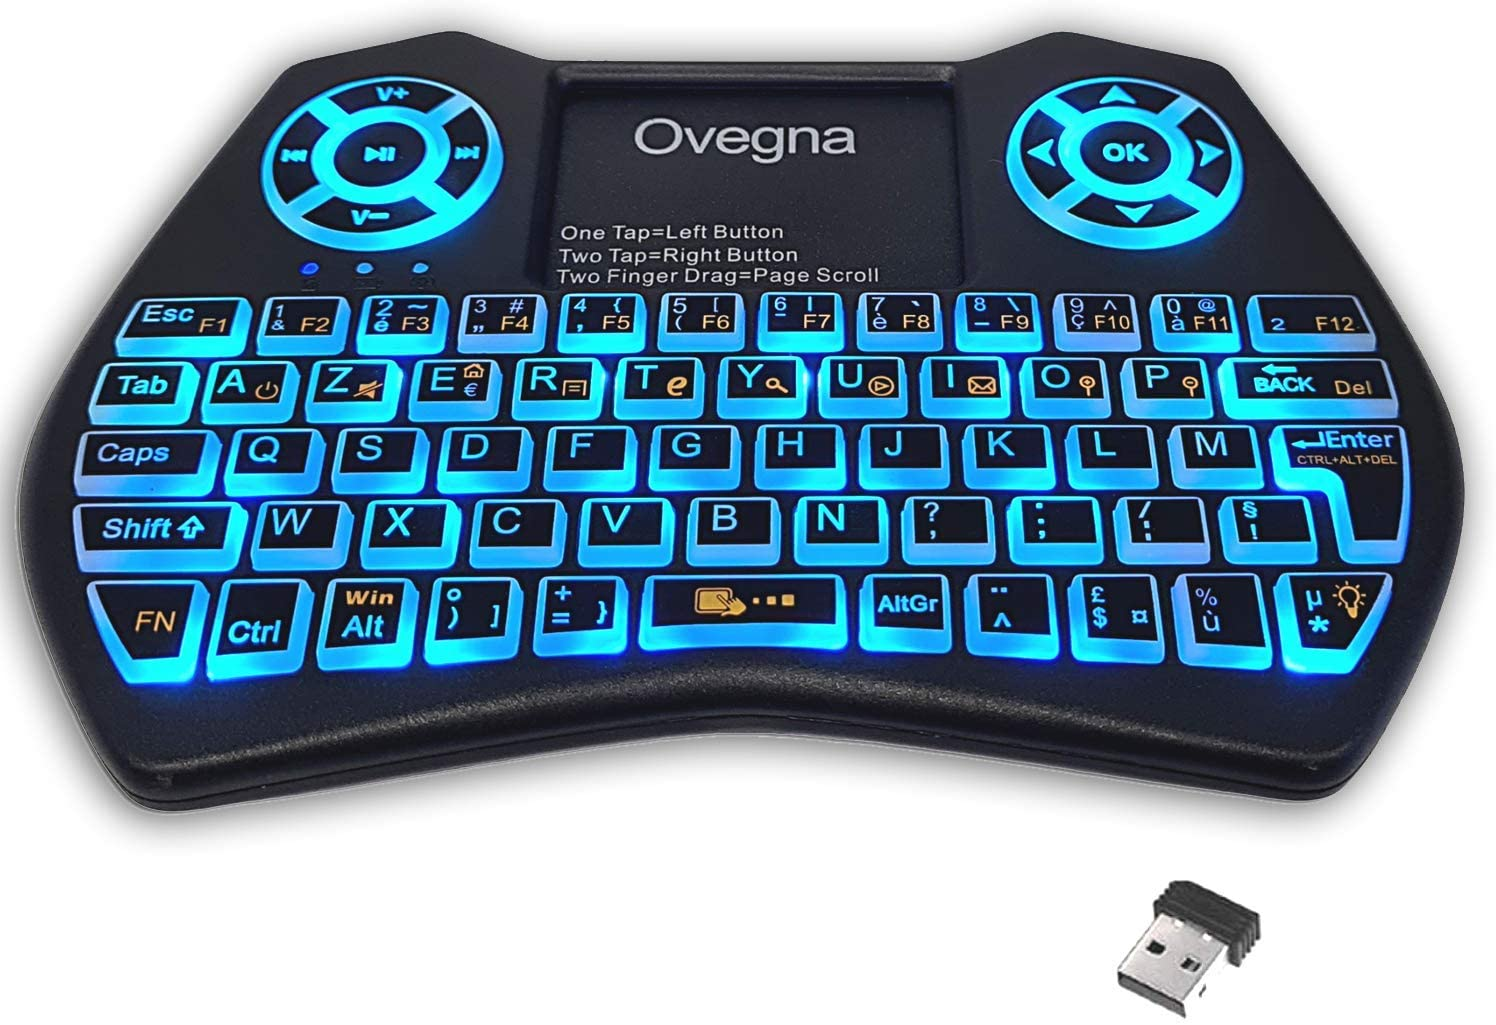 ovegna-s1-wireless-mini-2-4ghz-keyboard-azerty-with-touchpad-for-smart-tv-pc-mini-pc-raspberry-pi-2-3-consoles-laptop-pc-and-android-box--45